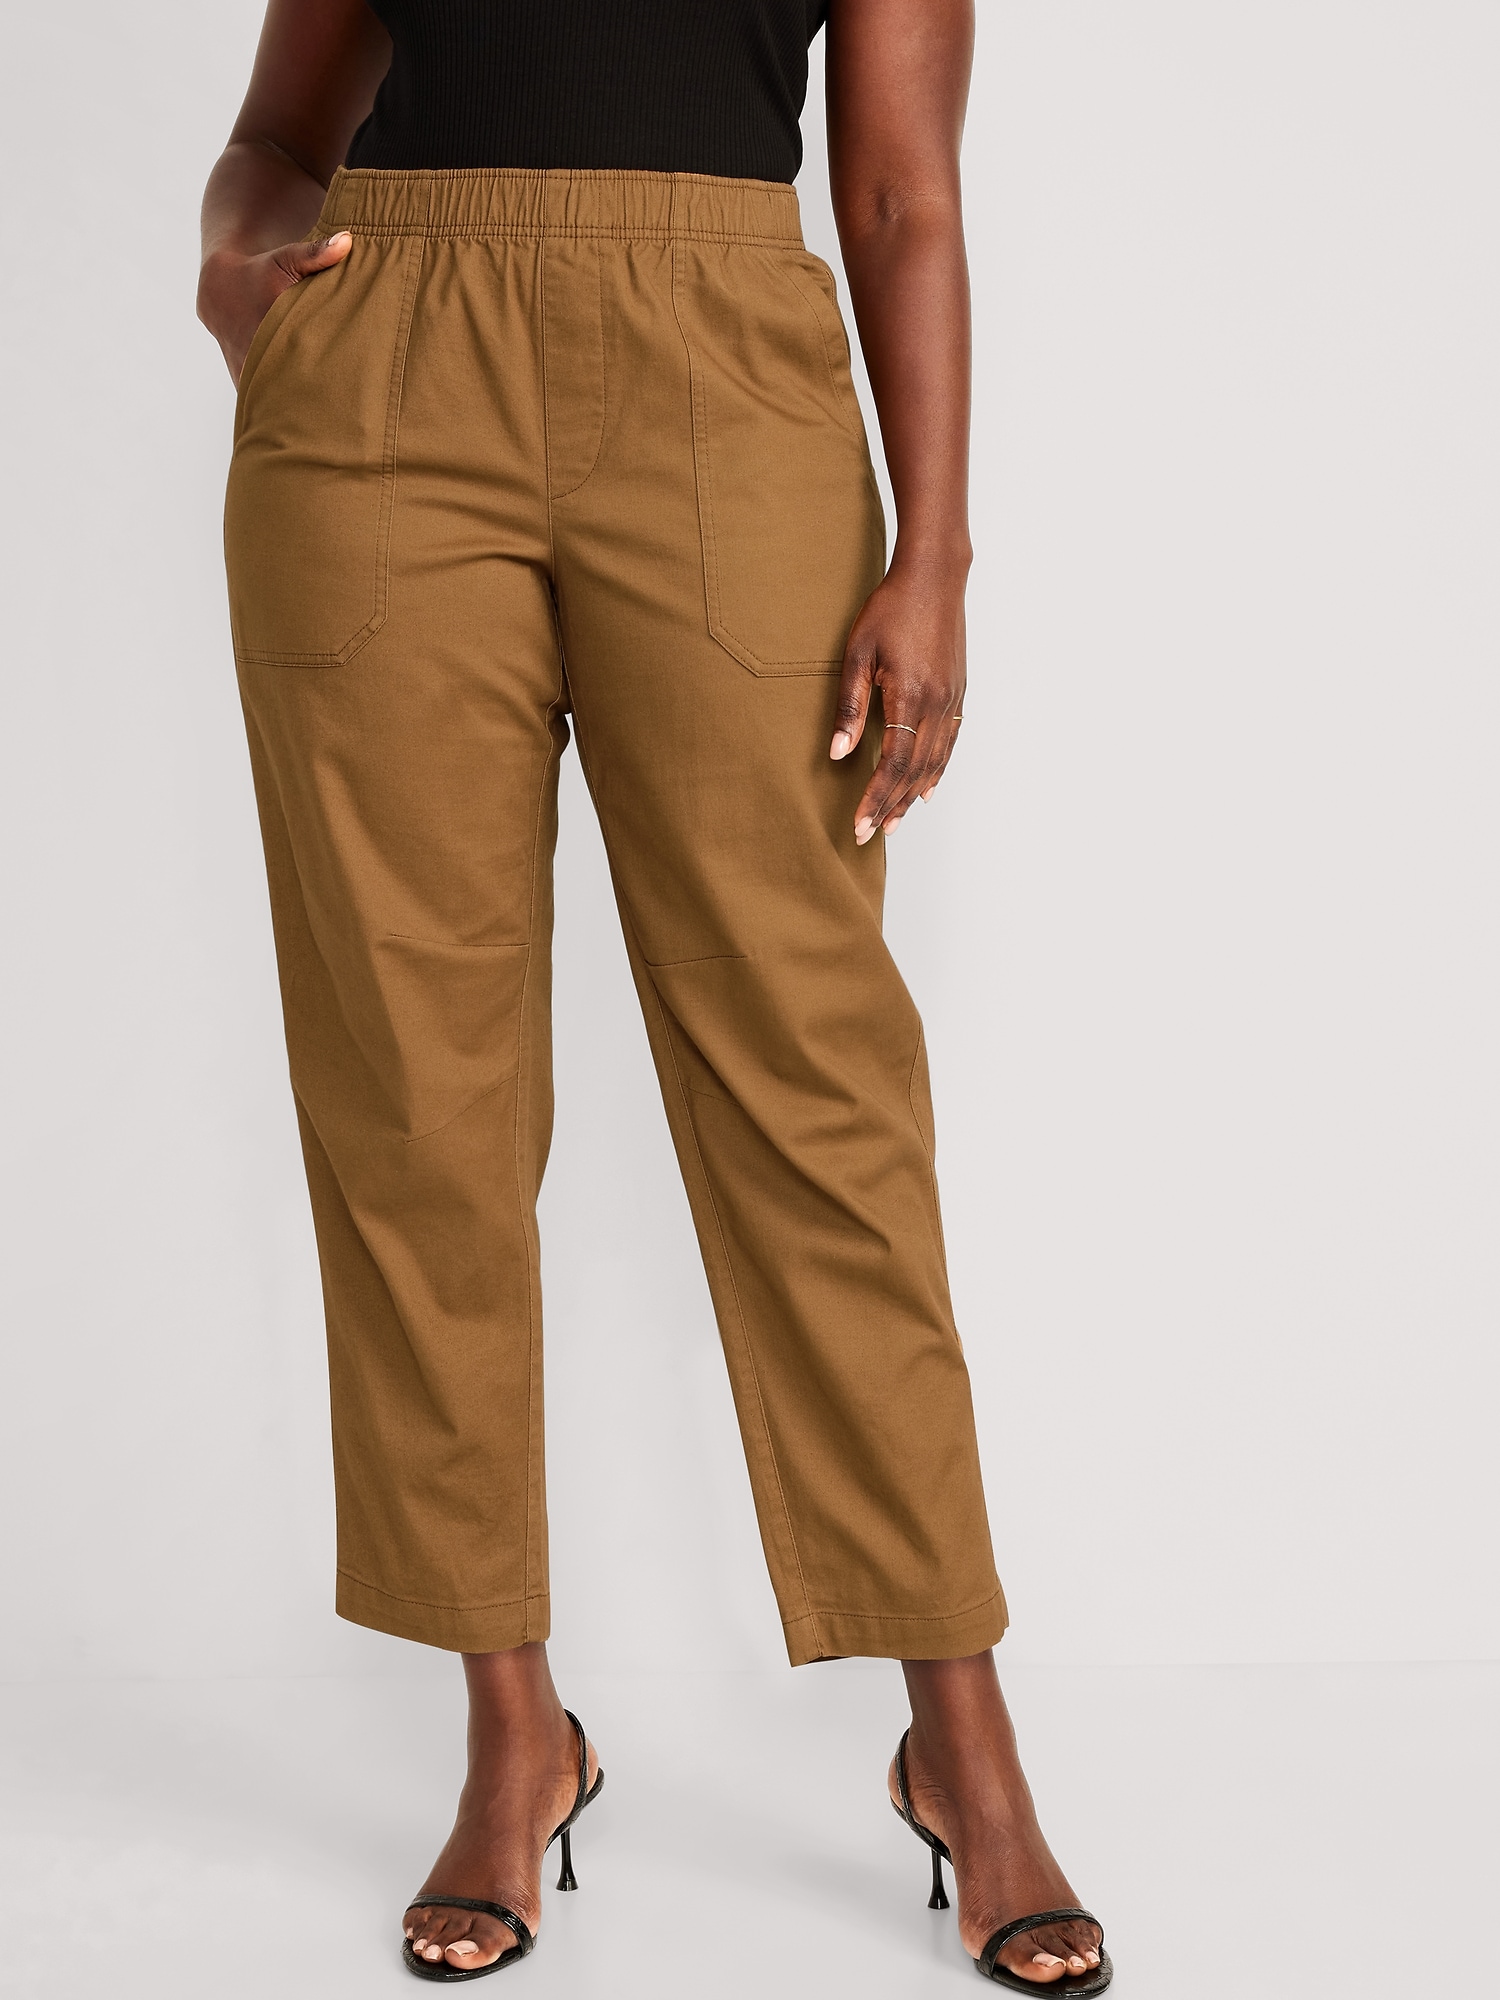 High-Waisted Pulla Utility Pants for Women | Old Navy